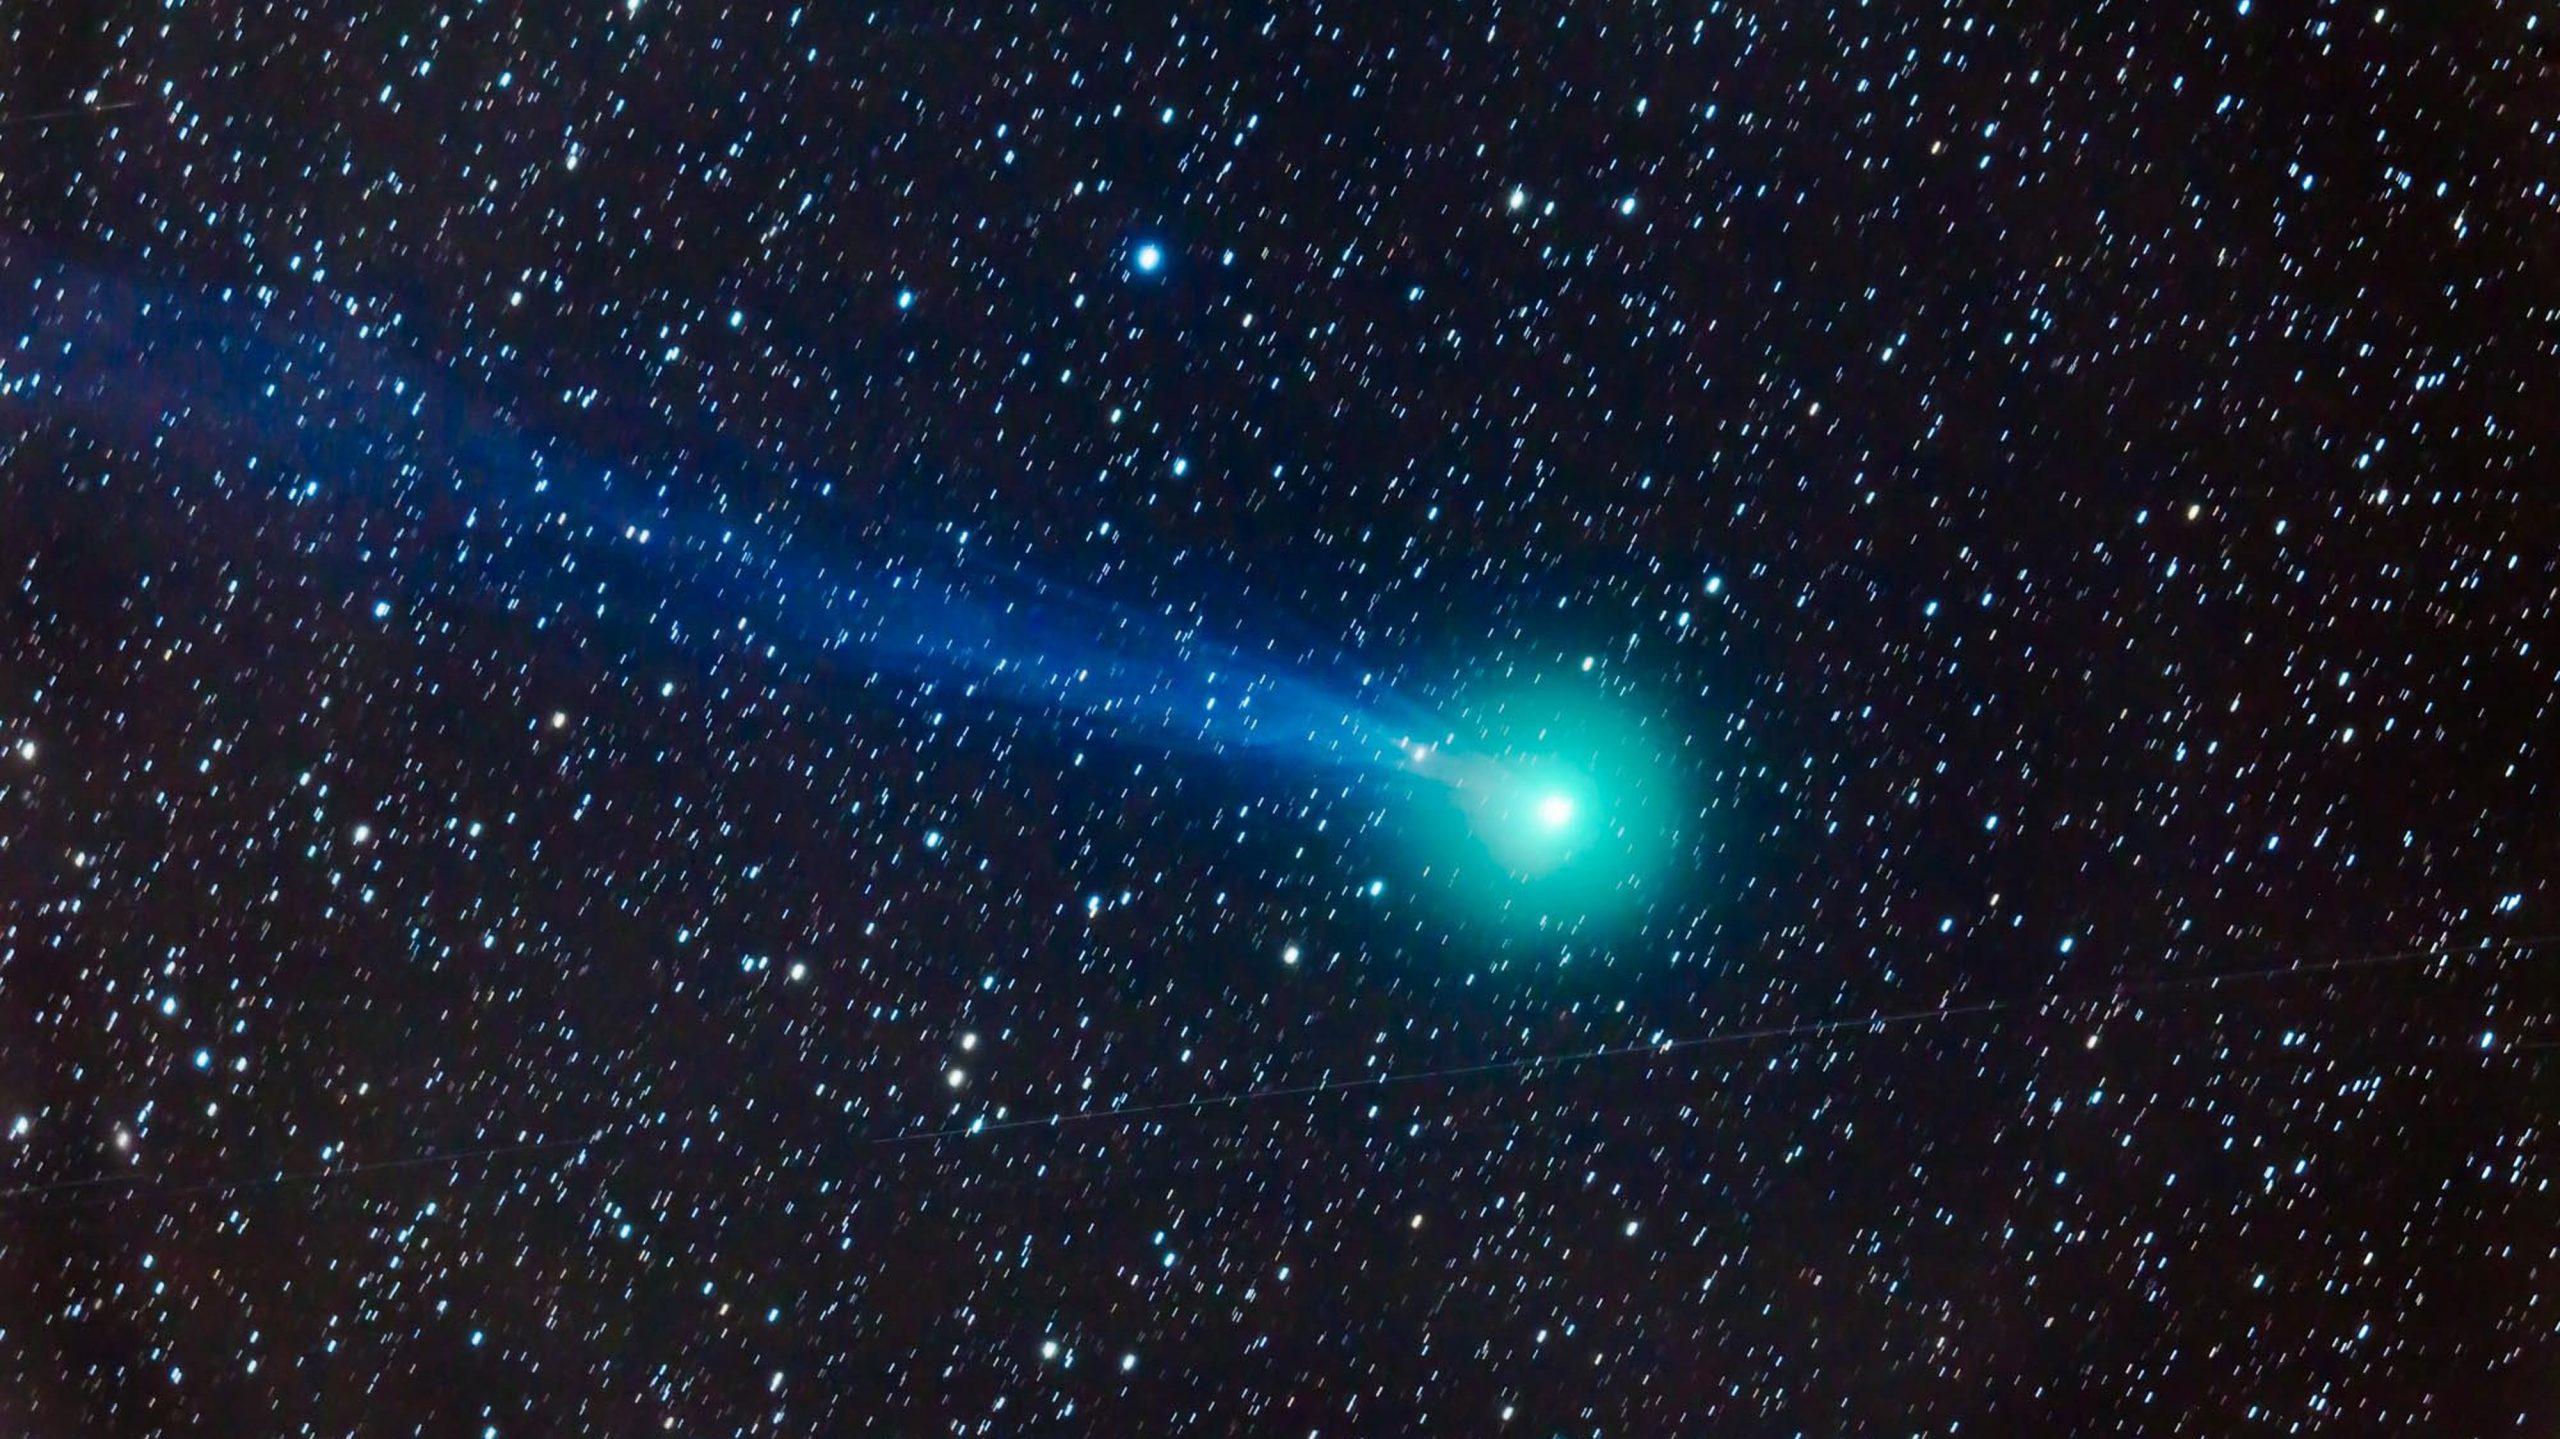 Green comet approaching Earth for a flyby_50.1